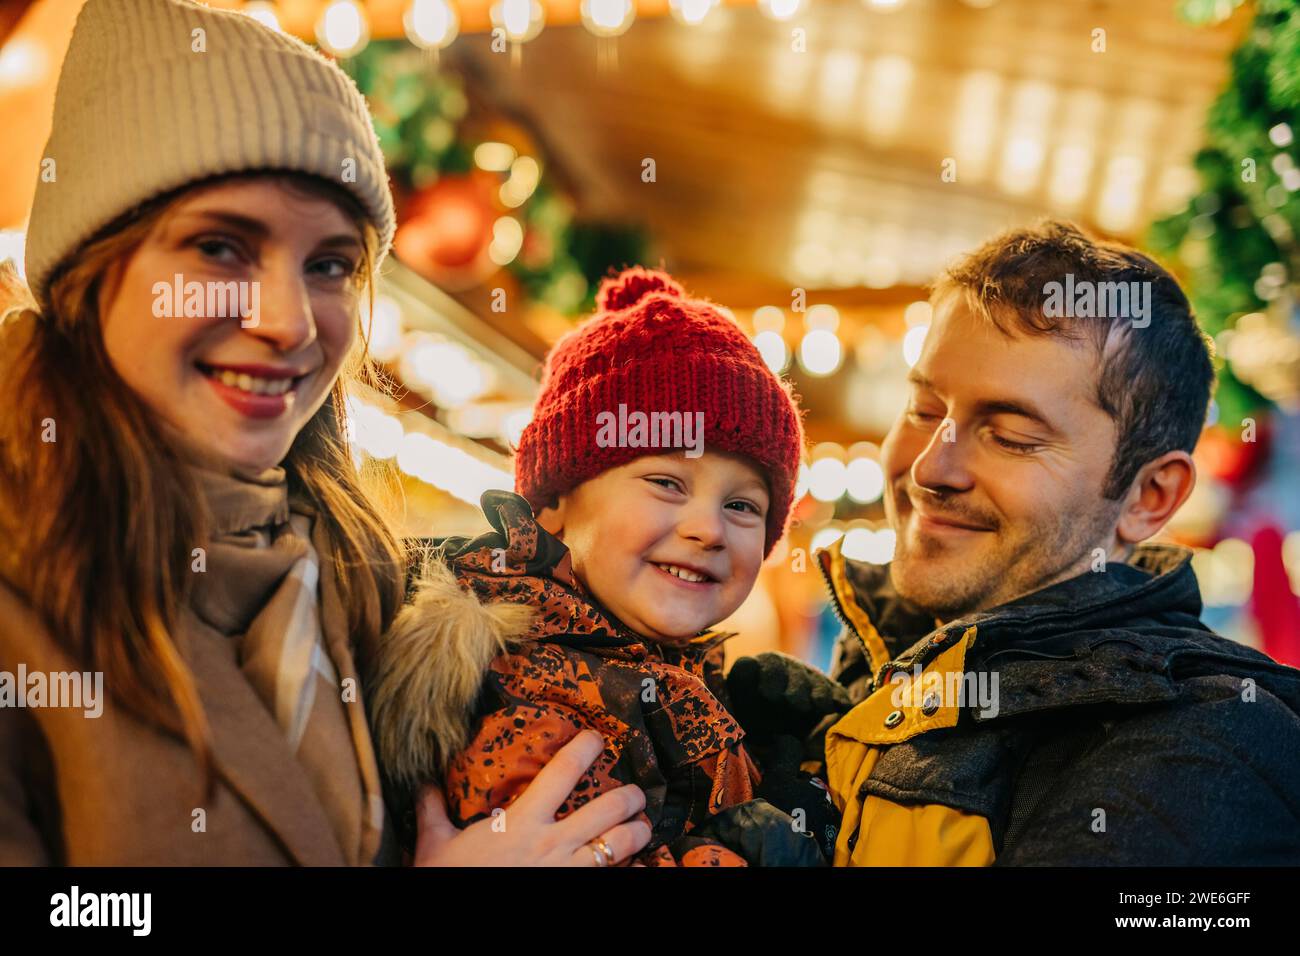 Parents spending leisure time together with son at Christmas market Stock Photo